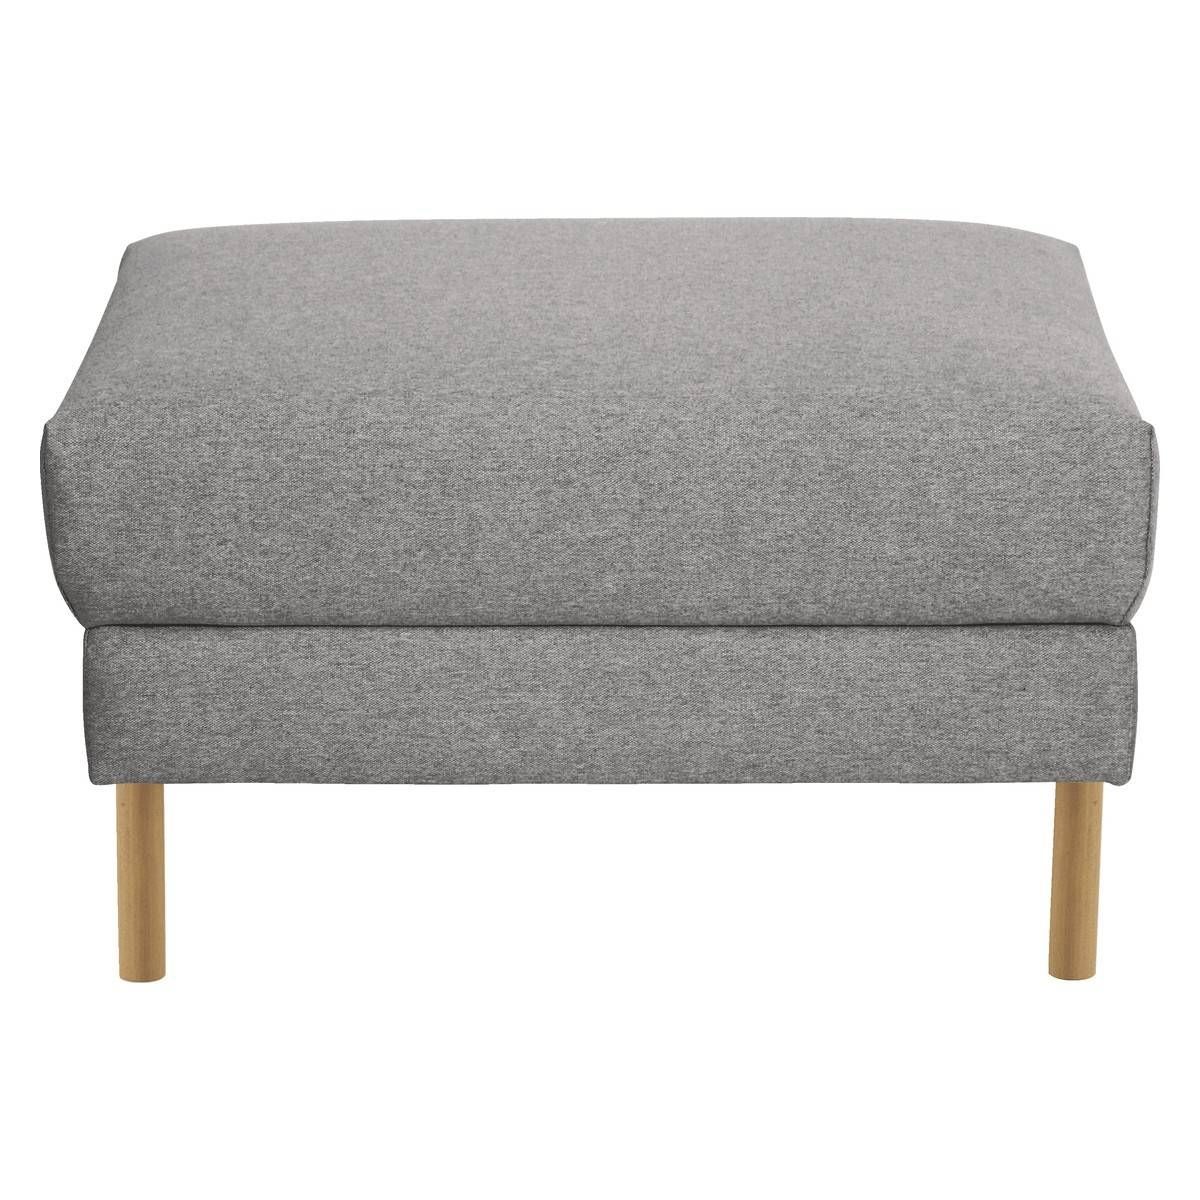 Hyde Grey Fabric Storage Footstool, Wooden Legs | Buy Now At Throughout Fabric Footstools (View 14 of 30)